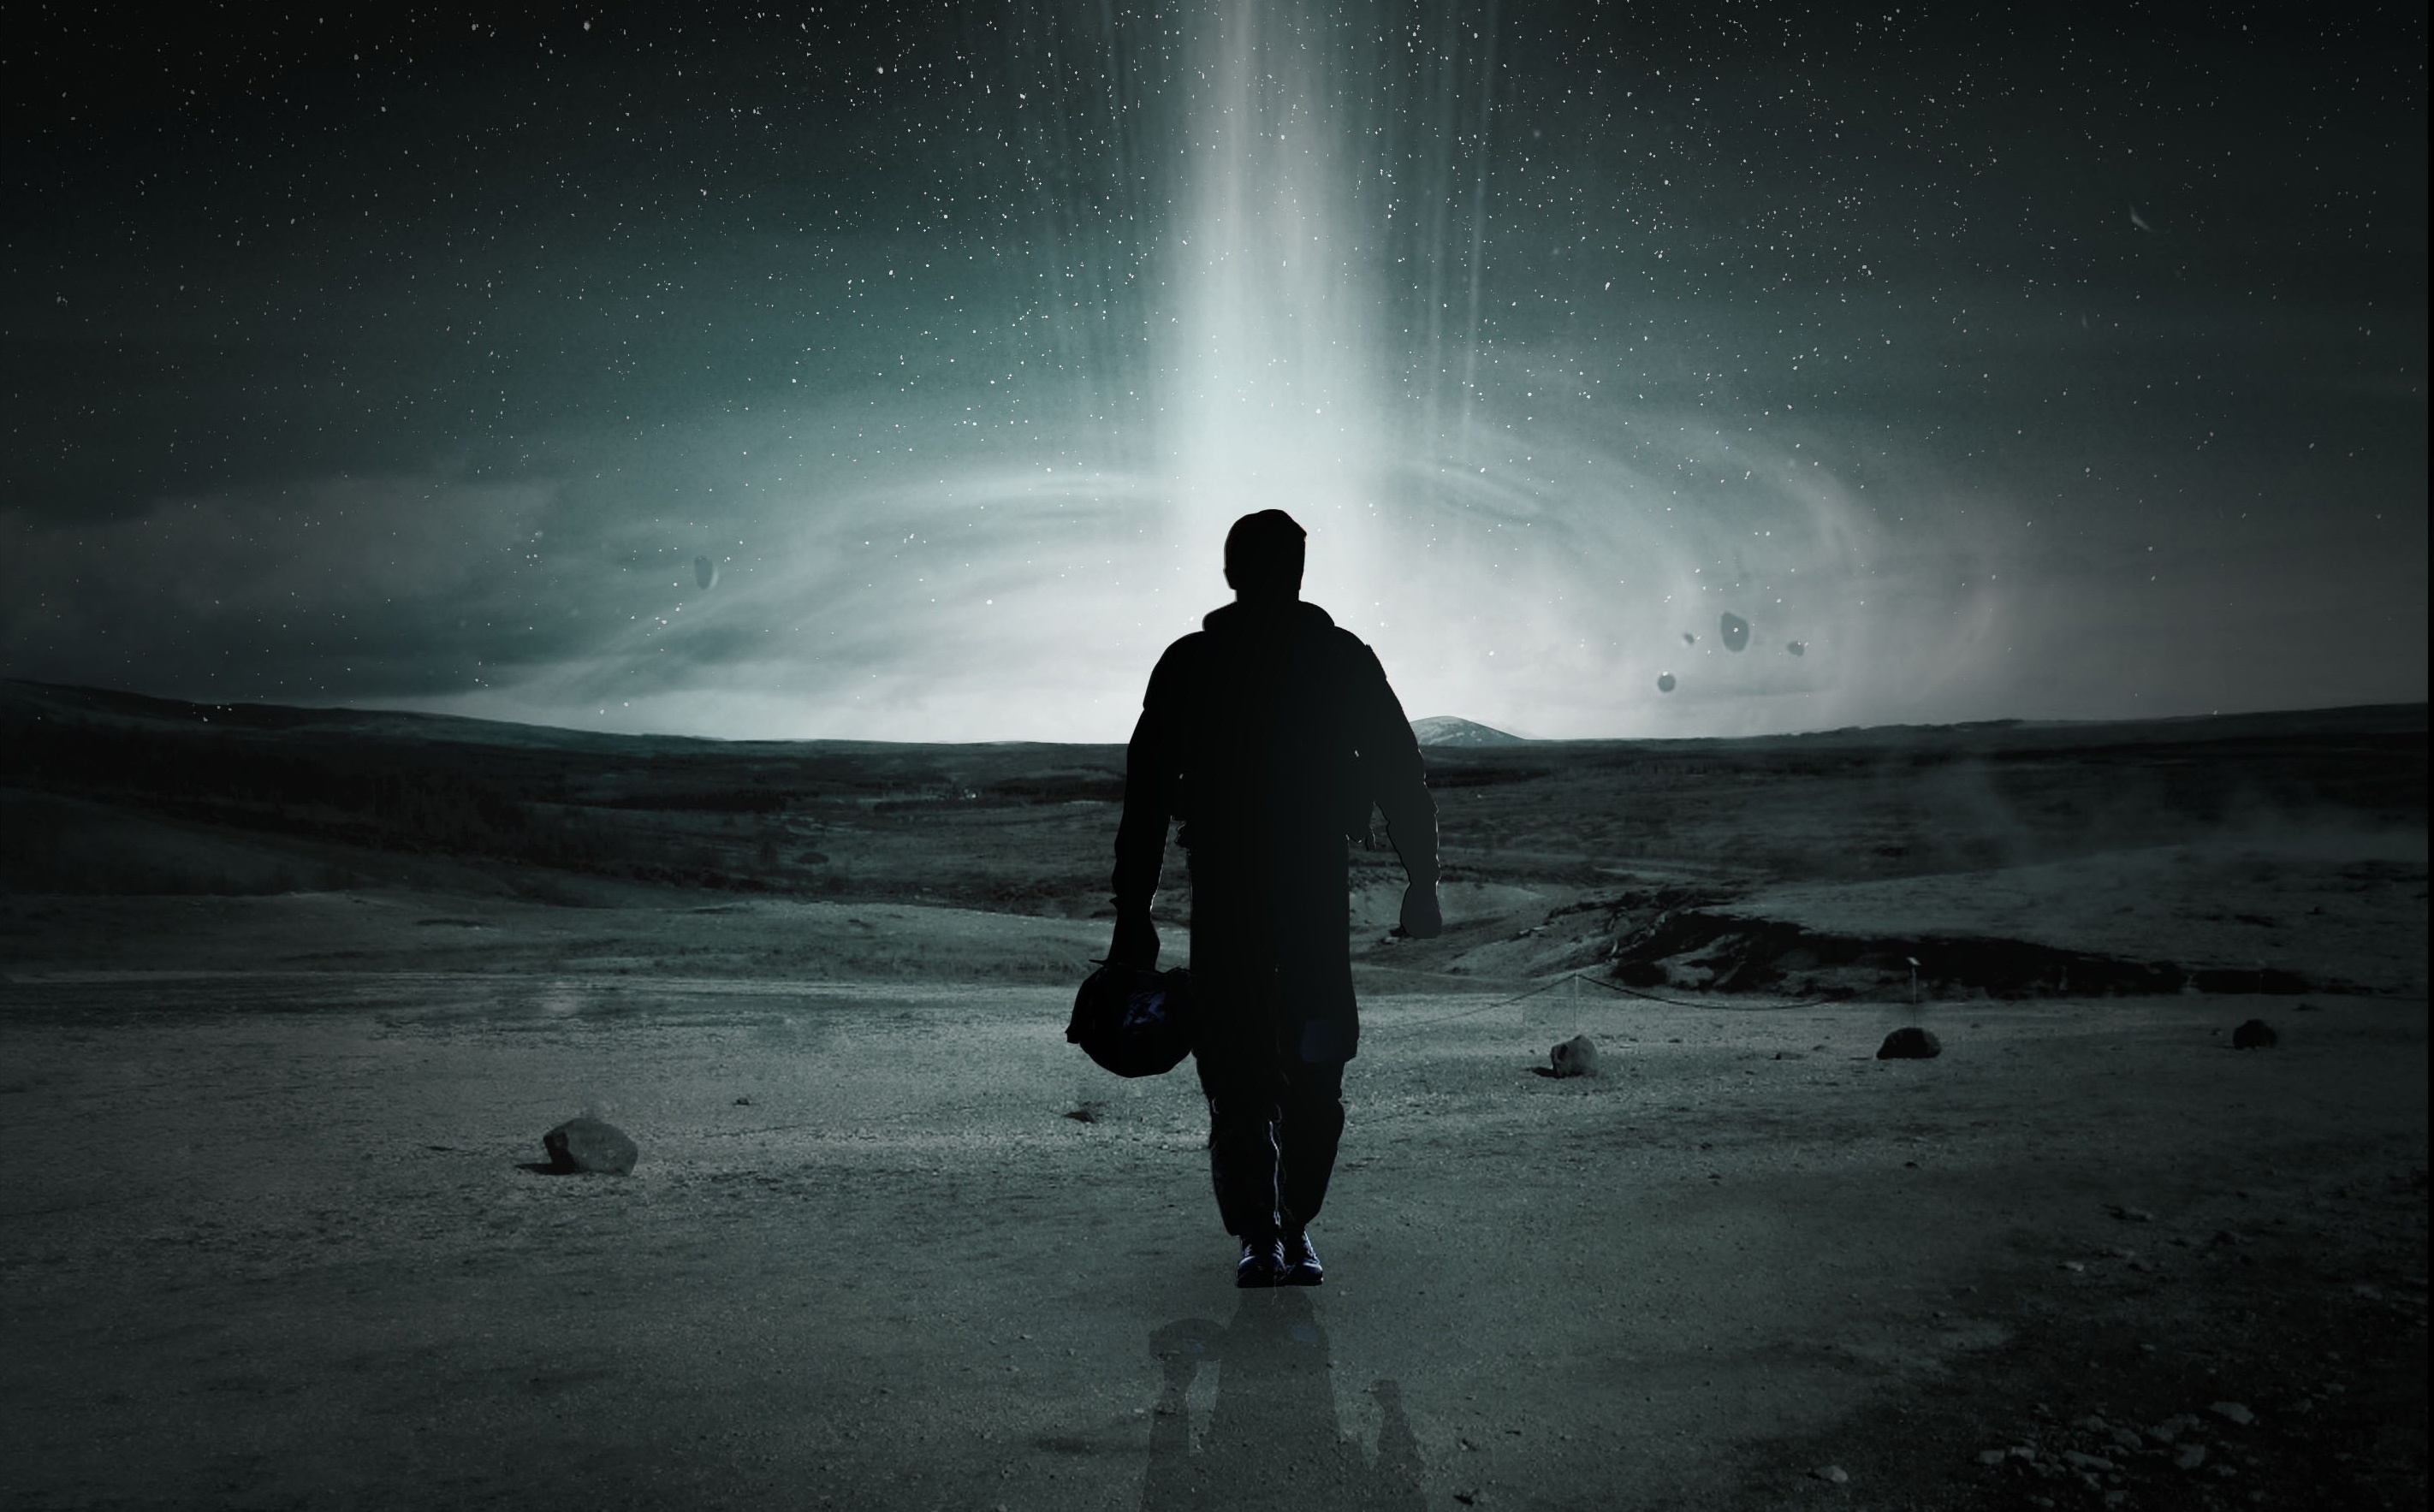 Interstellar: The film from director Christopher Nolan, The mysteries of space and time. 2850x1770 HD Wallpaper.